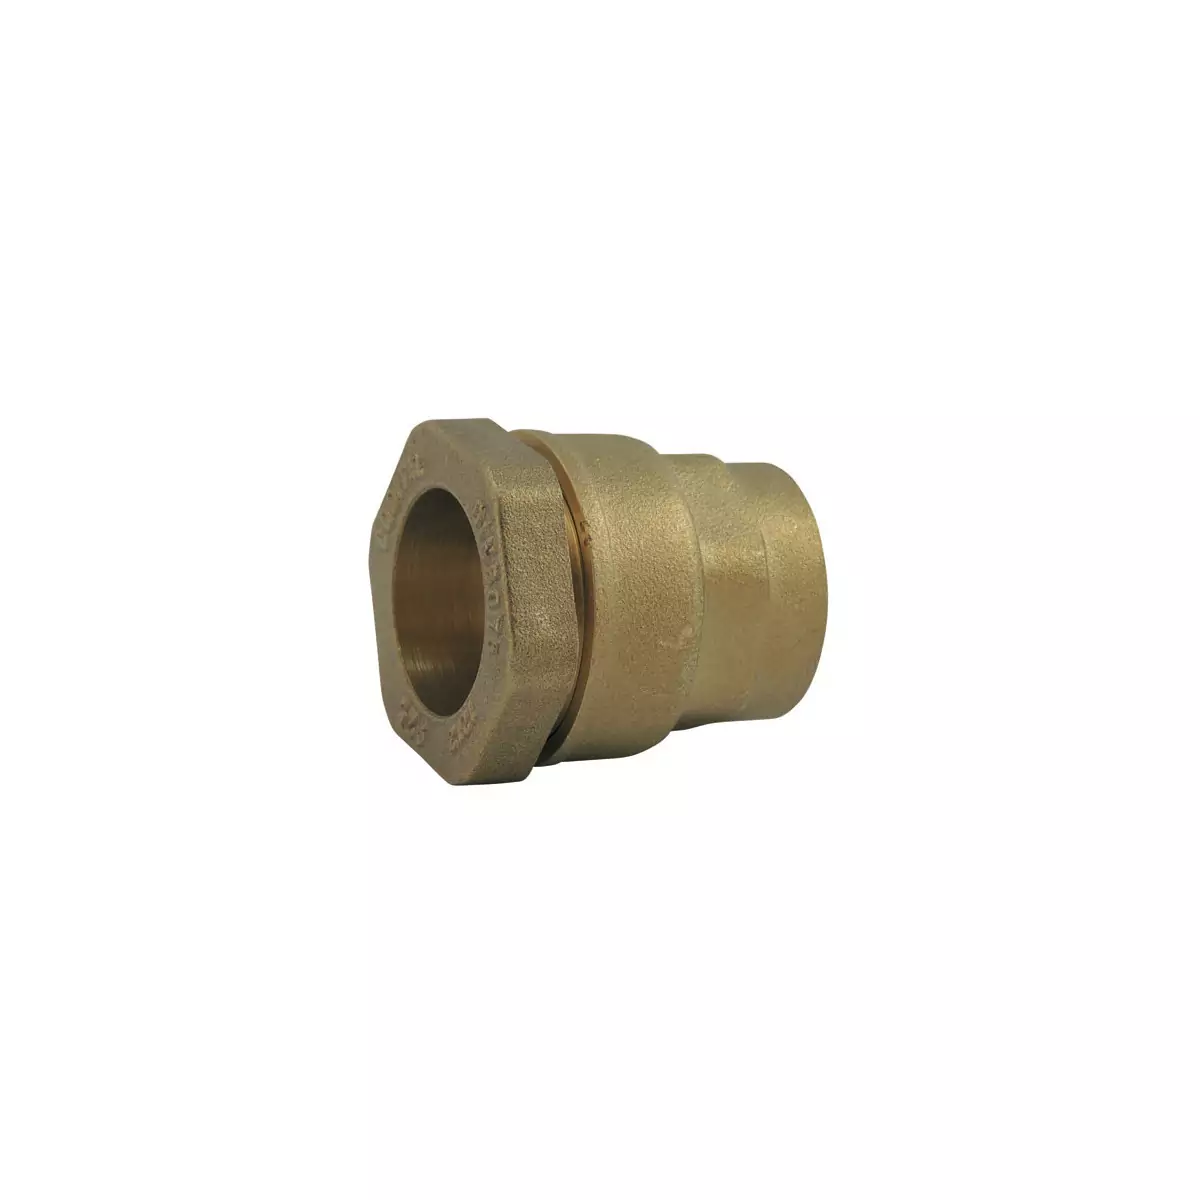 Brass compression fitting for straight PE female pipe - short model